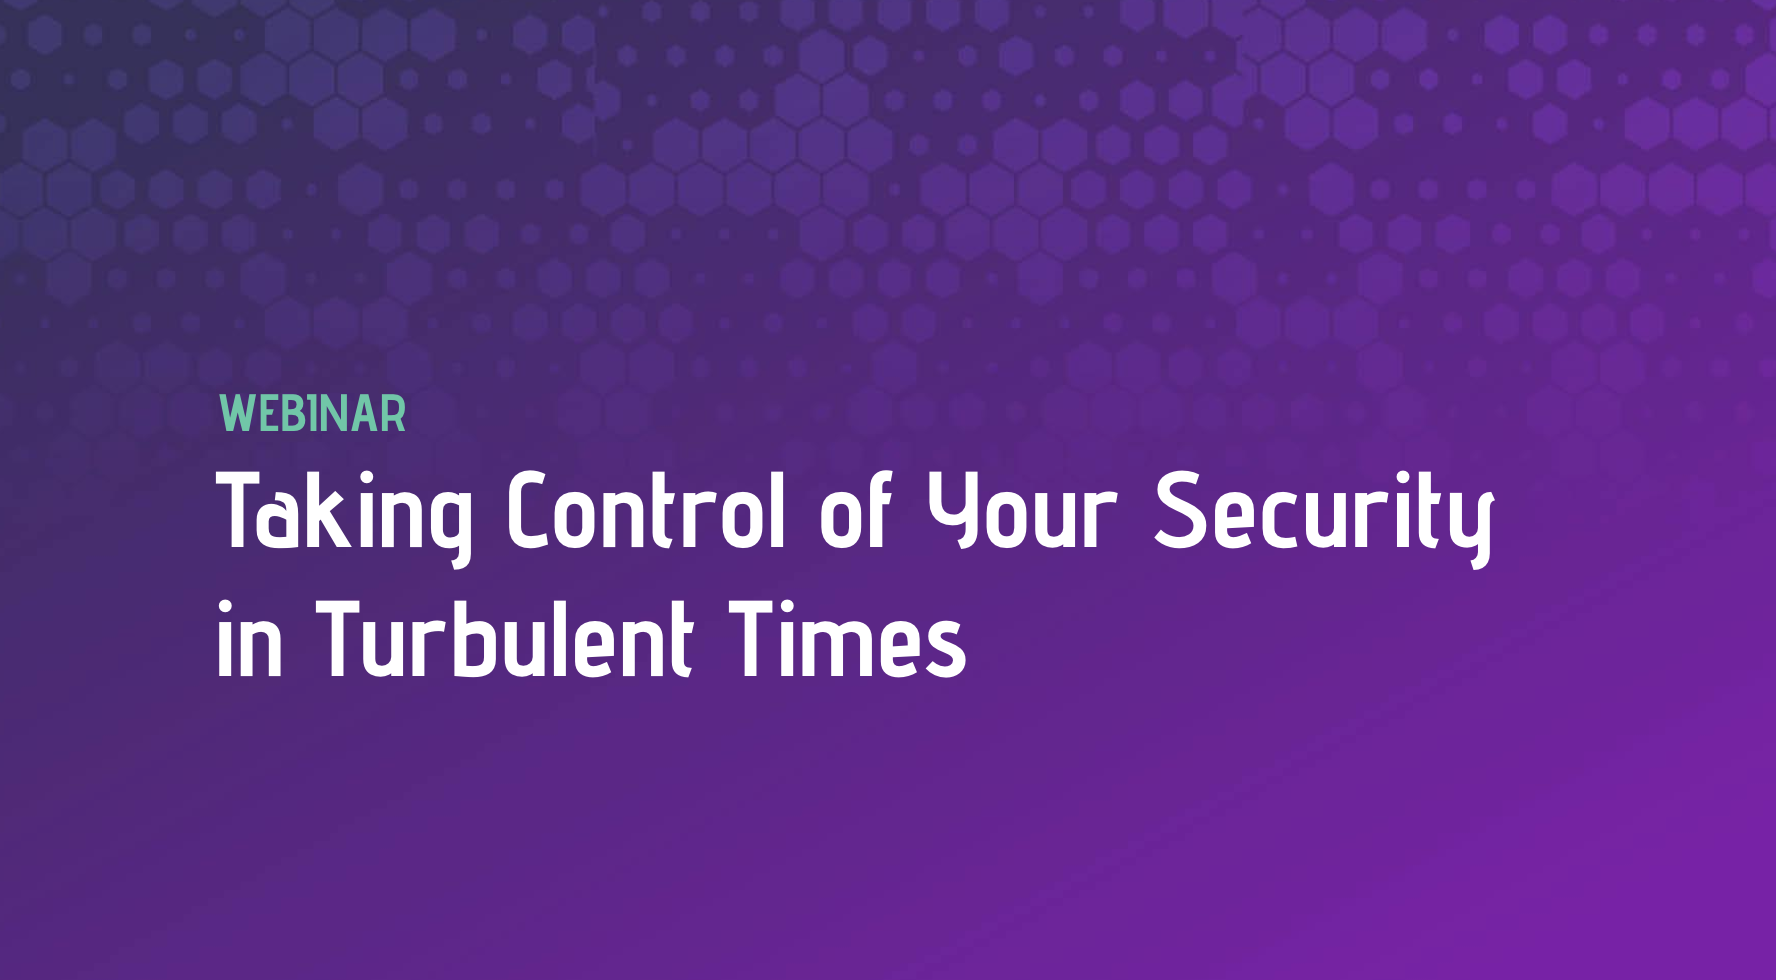 Taking Control of Your Security in Turbulent Times